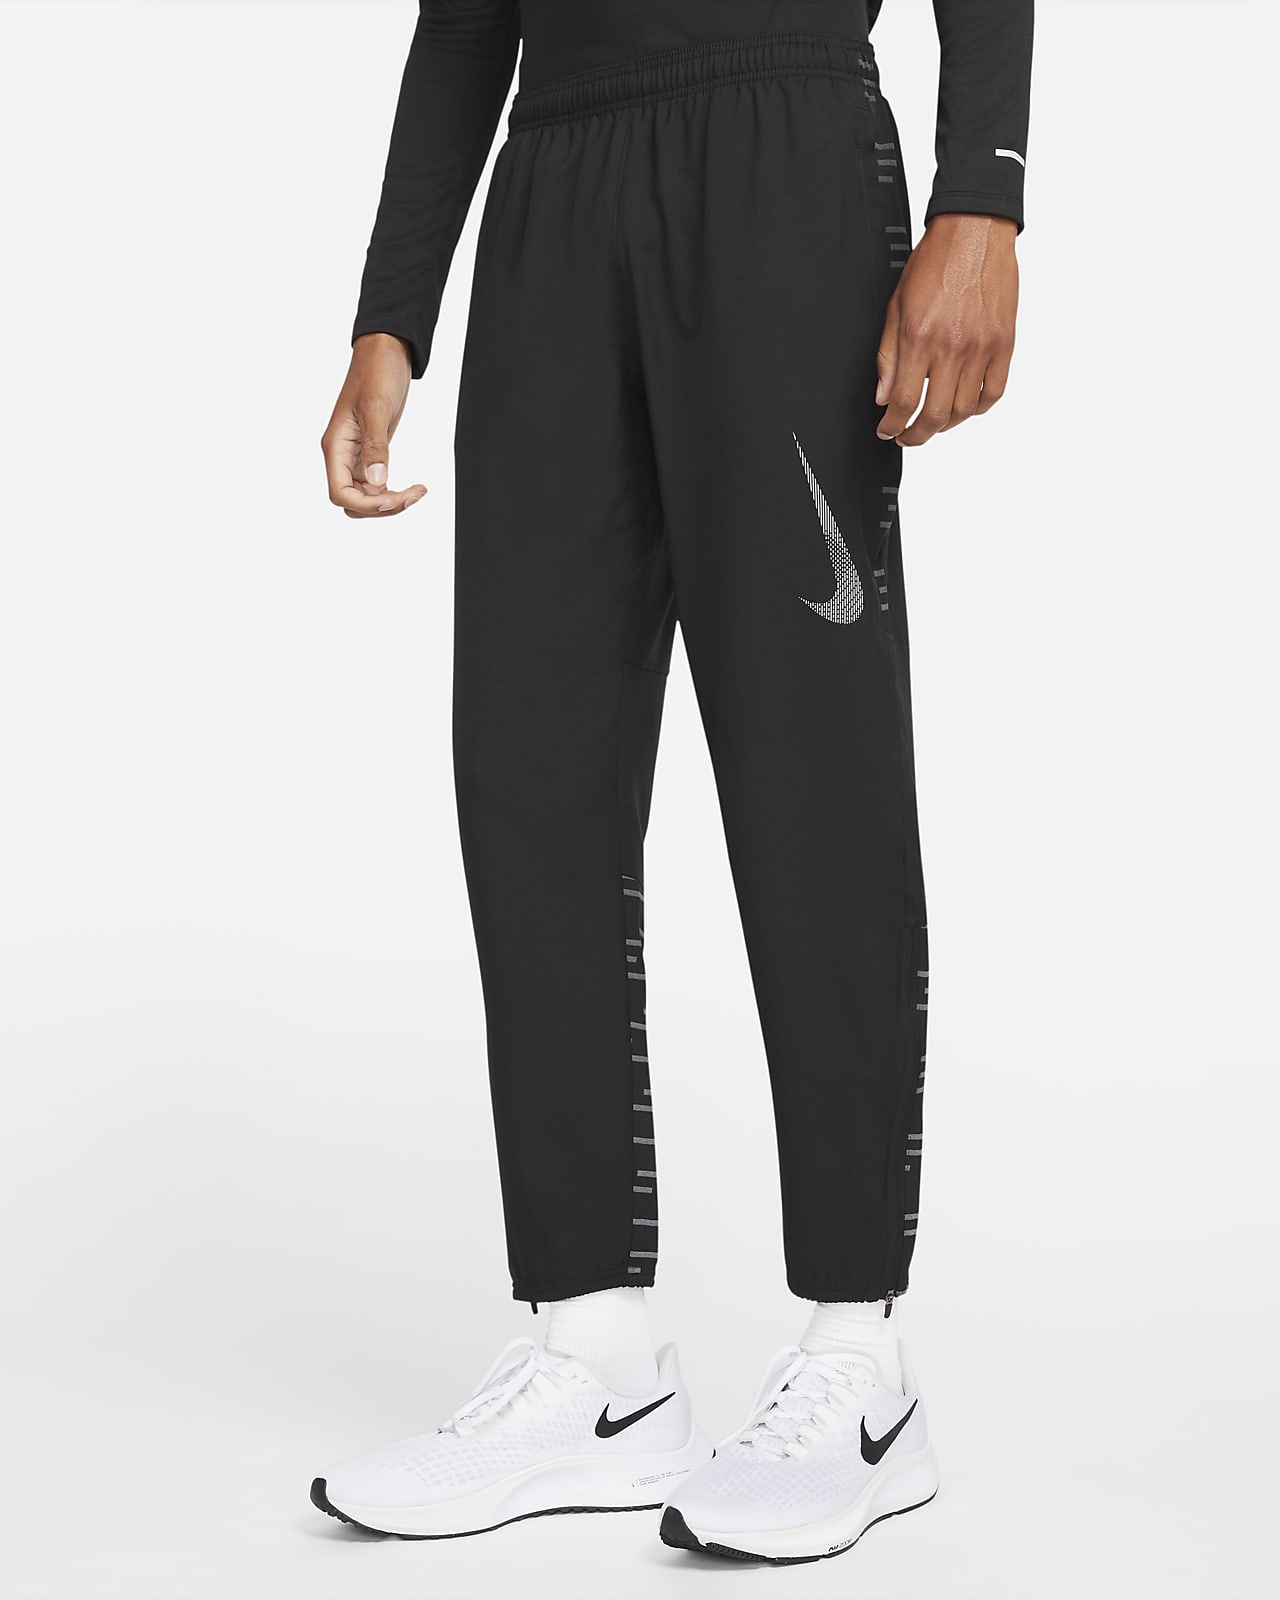 Nike Dri-FIT Run Division Challenger Men's Woven Running Trousers. Nike AT